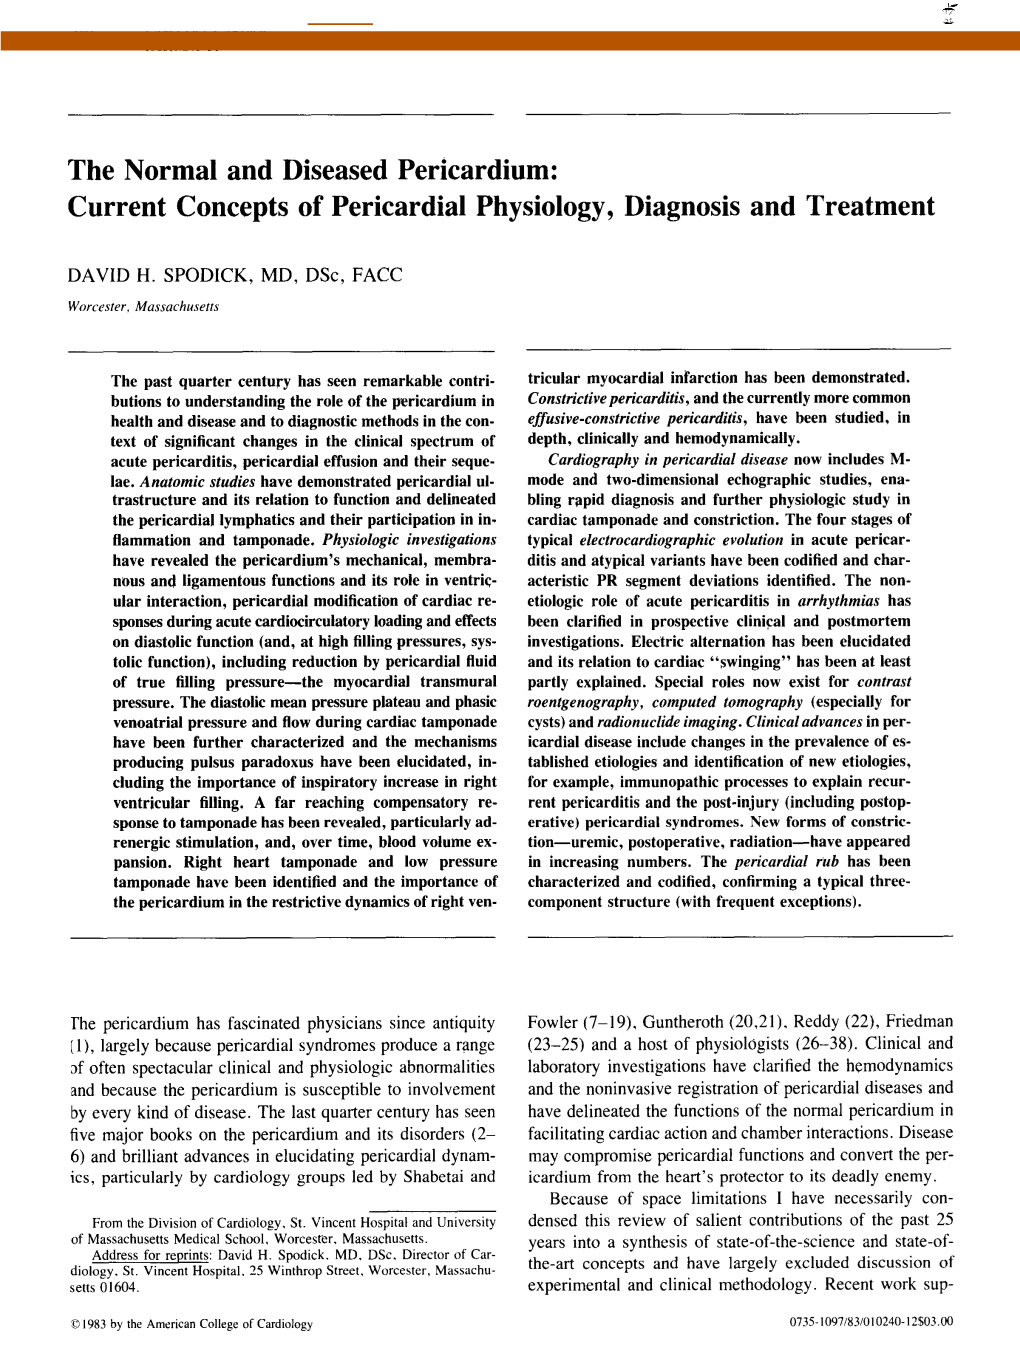 The Normal and Diseased Pericardium: Current Concepts of Pericardial Physiology, Diagnosis and Treatment